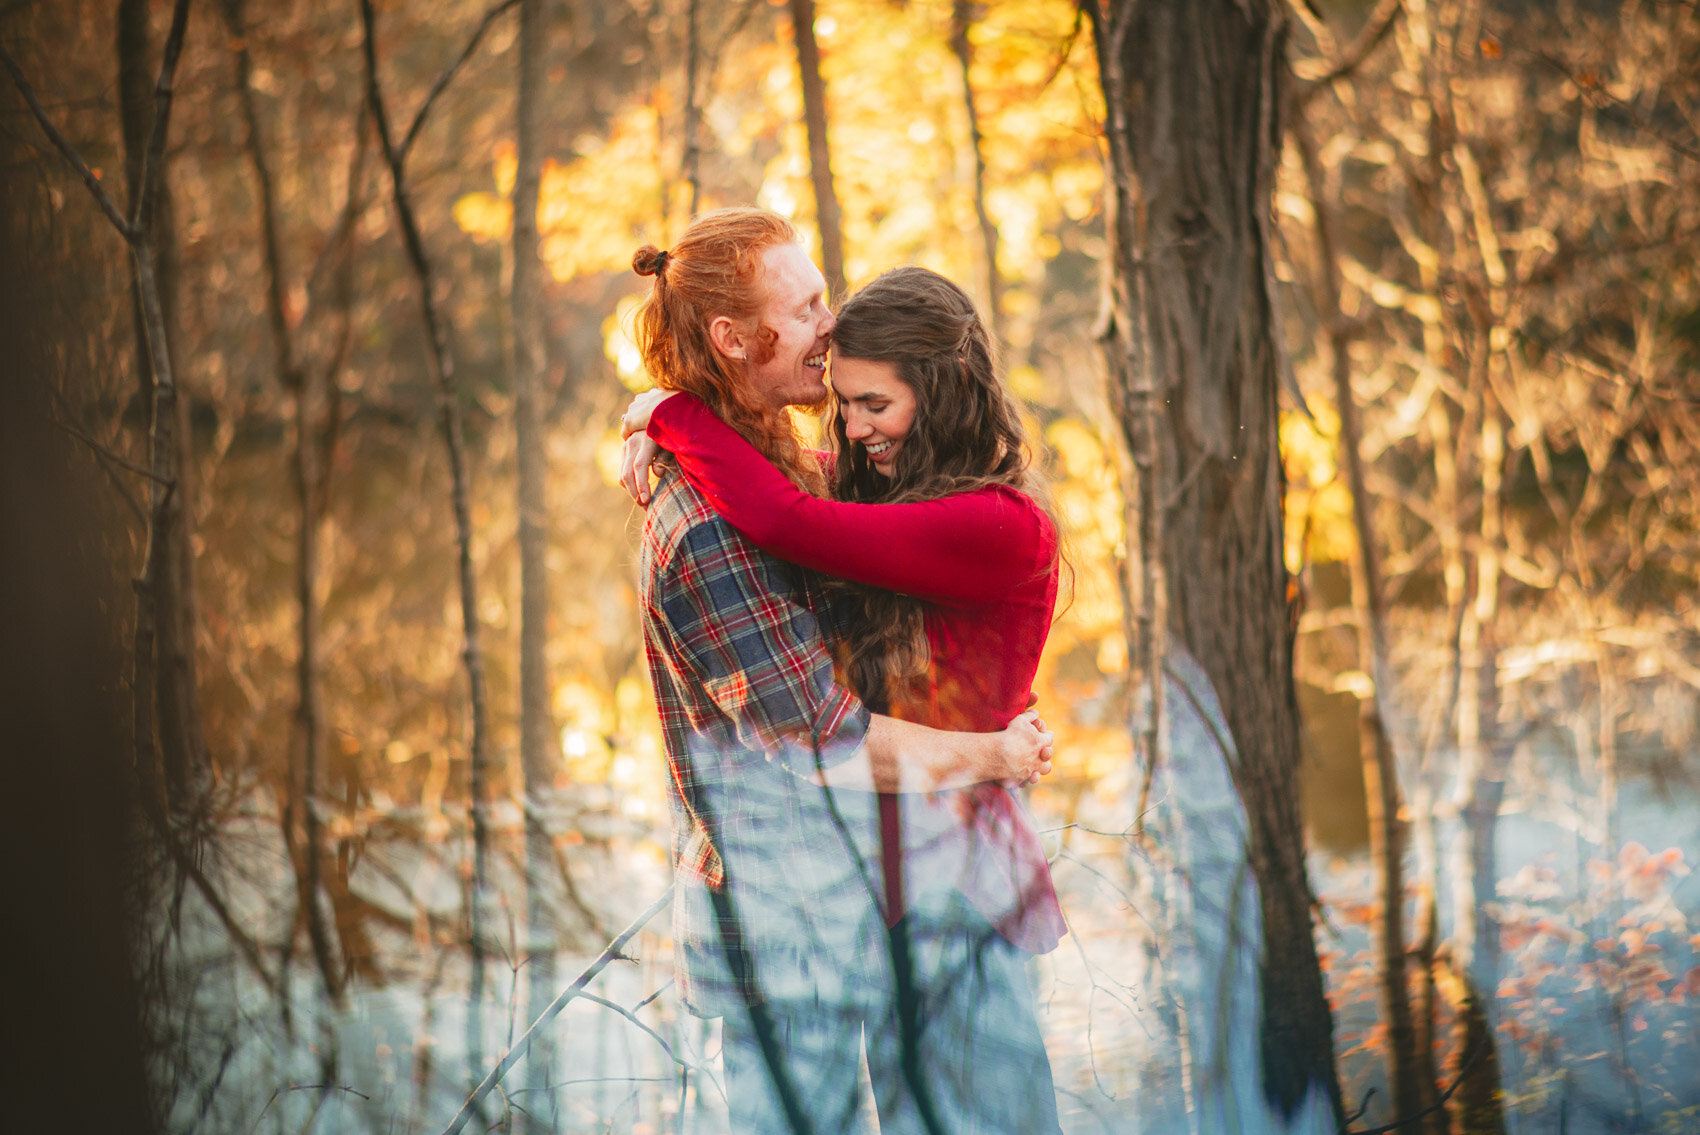 greenville illinois engagement session moses and emily-9.jpg